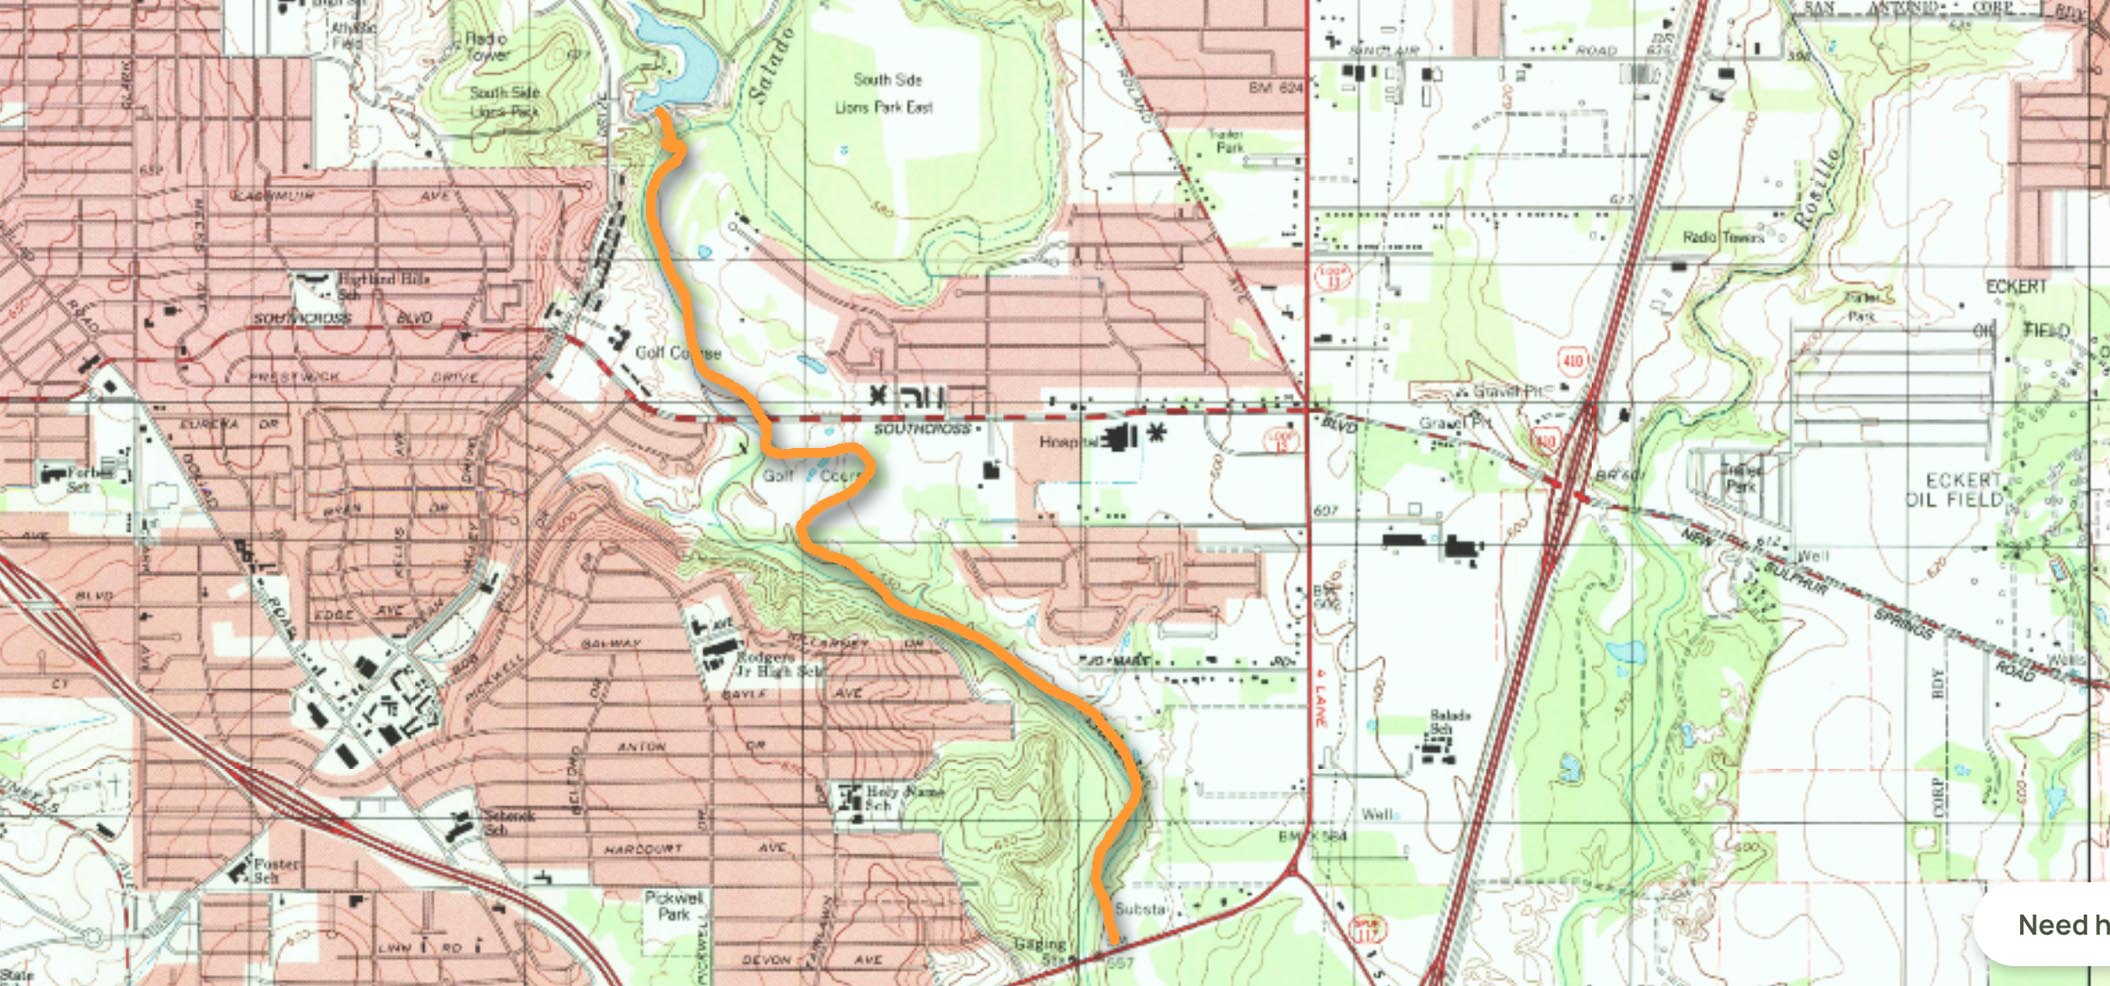 Completed trail connects Southside Lions Park to S.E. Military—Maps: USGS, Graphics: SRR